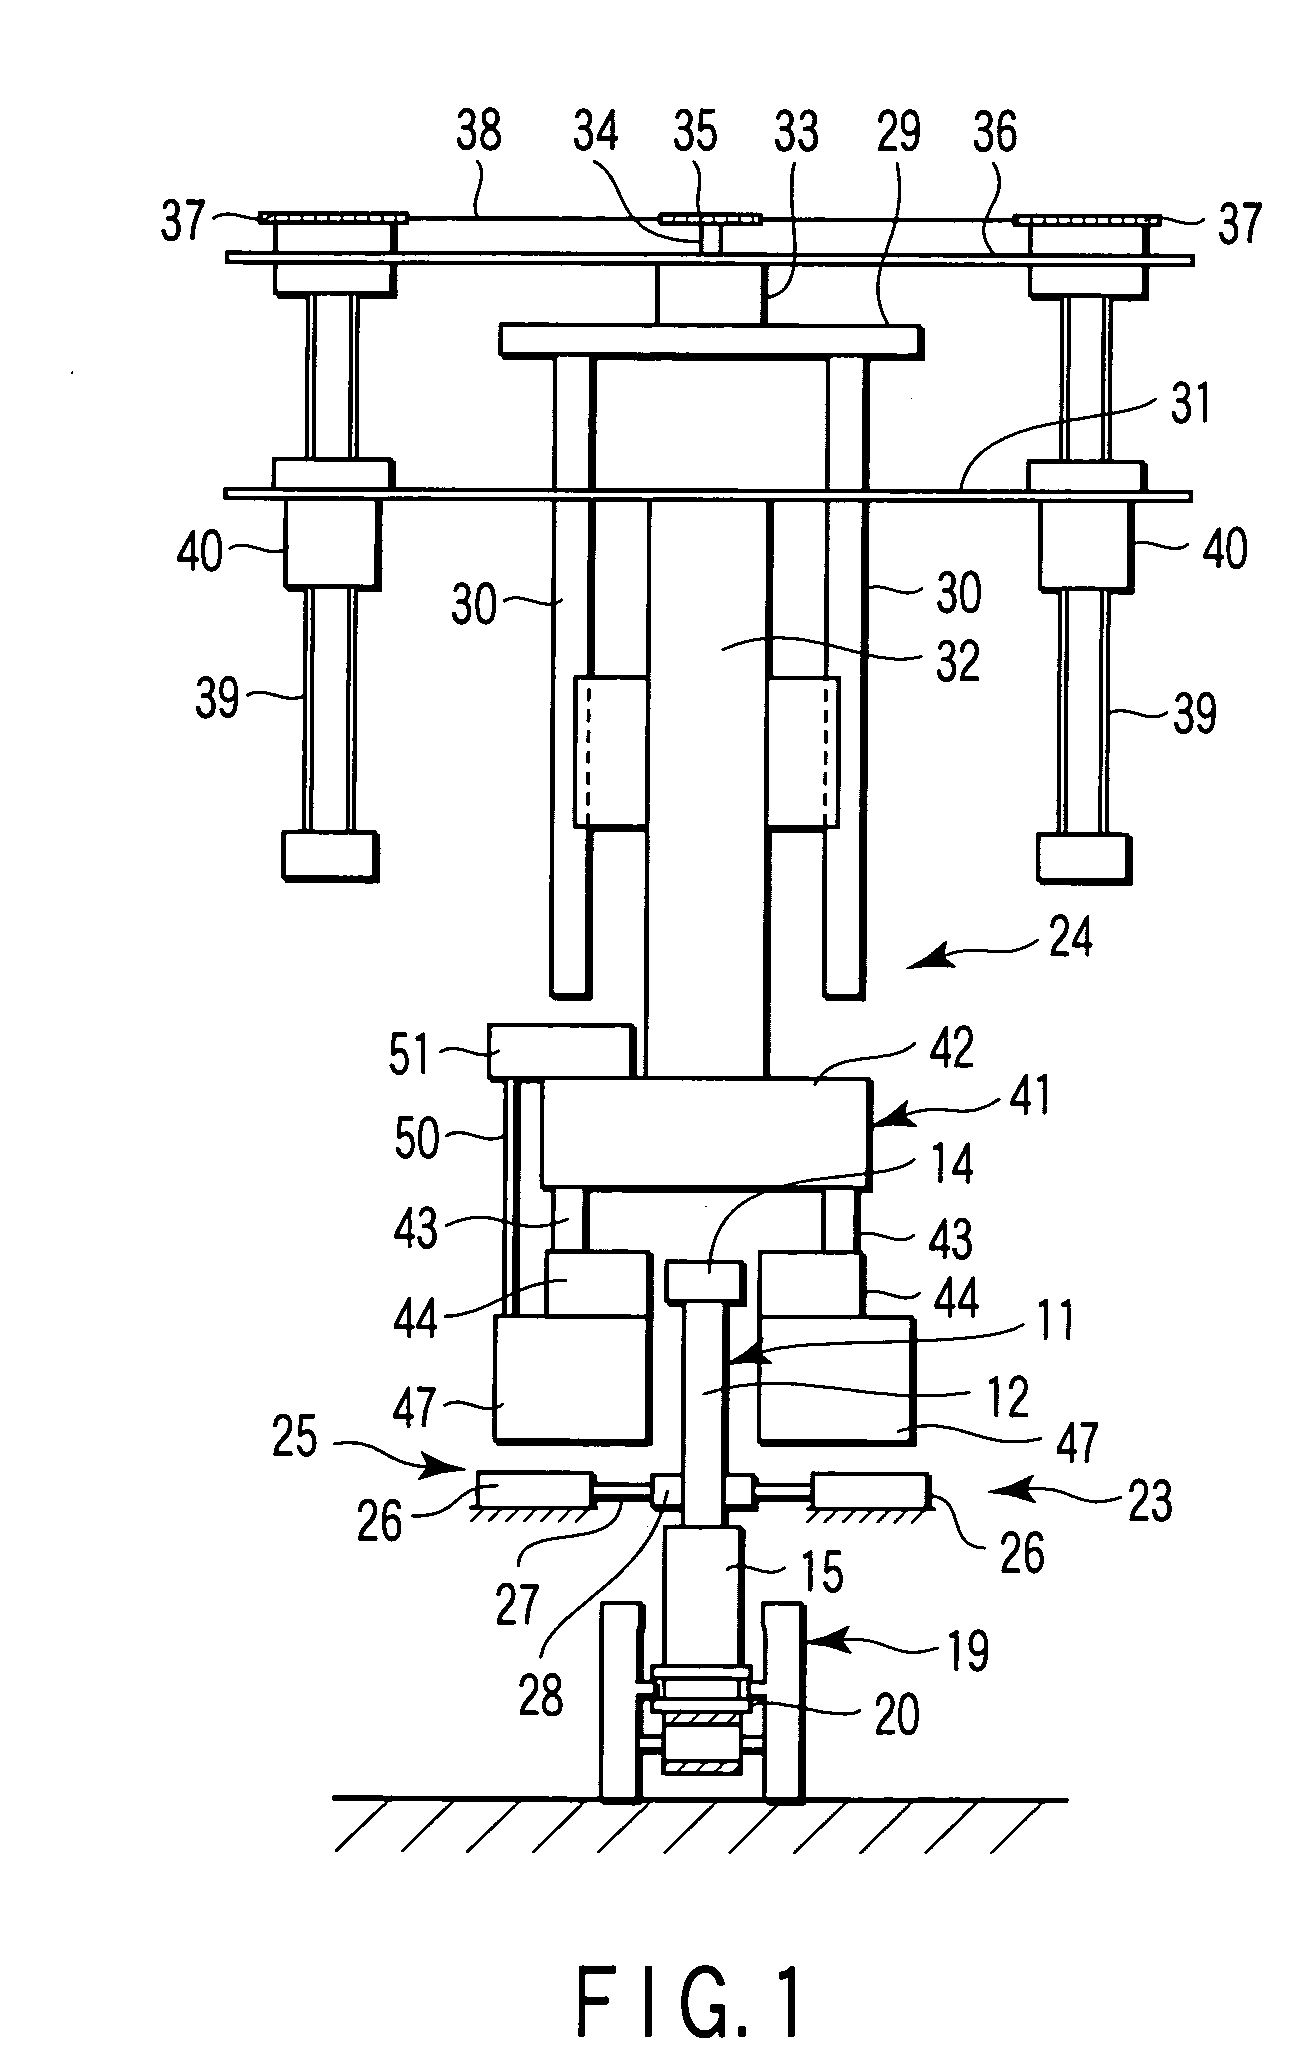 Cap removal apparatus and cap removal method for vacuum blood collection tubes